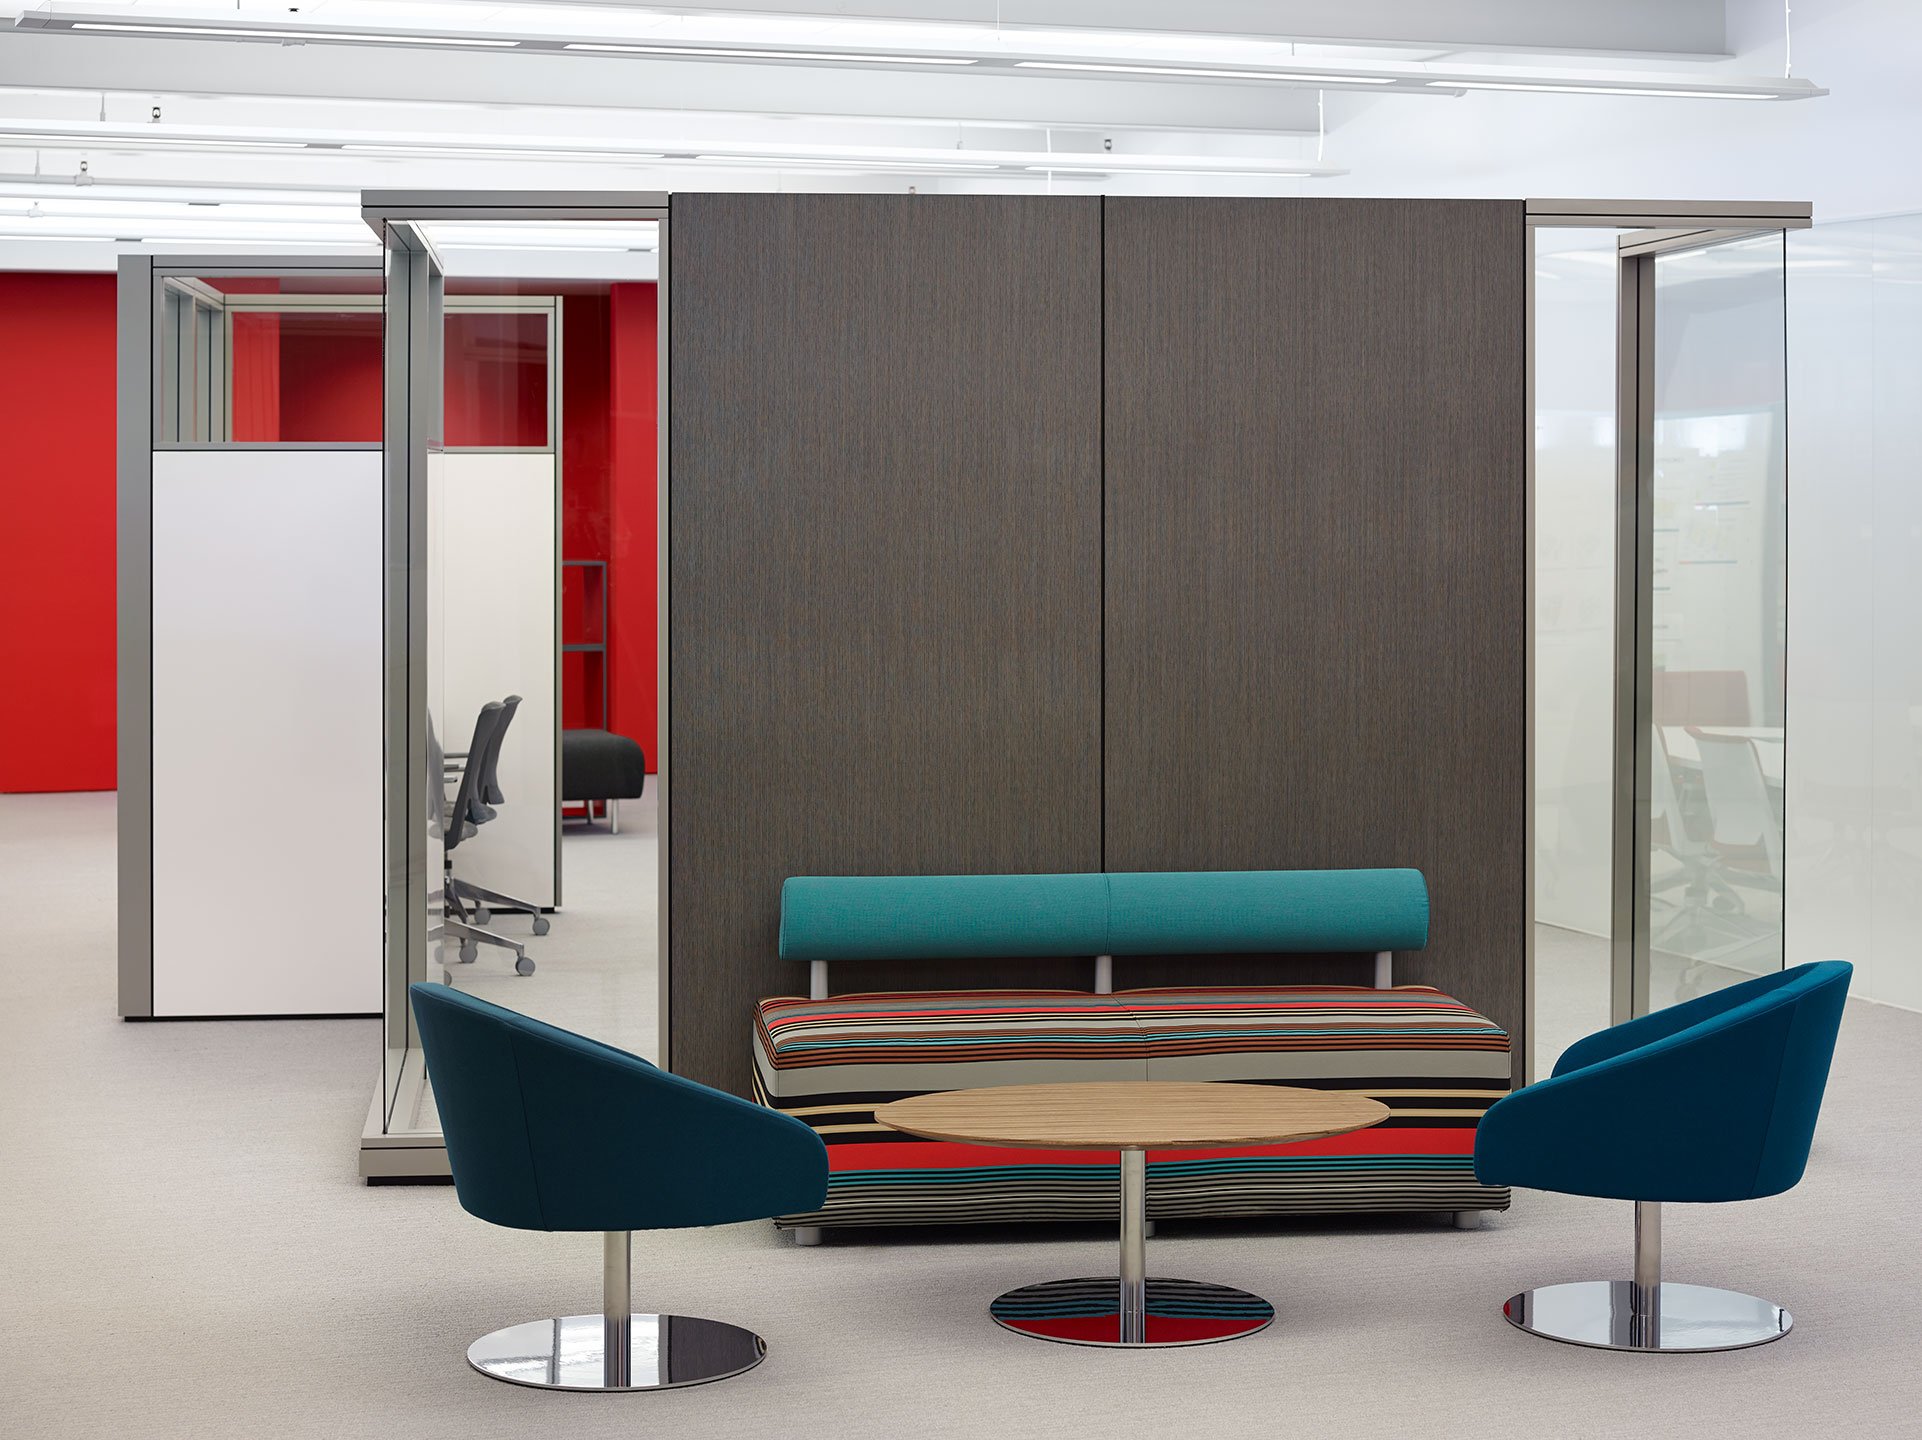 Haworth Enclose Wall in office space seperating desks and lounge area for collaboration